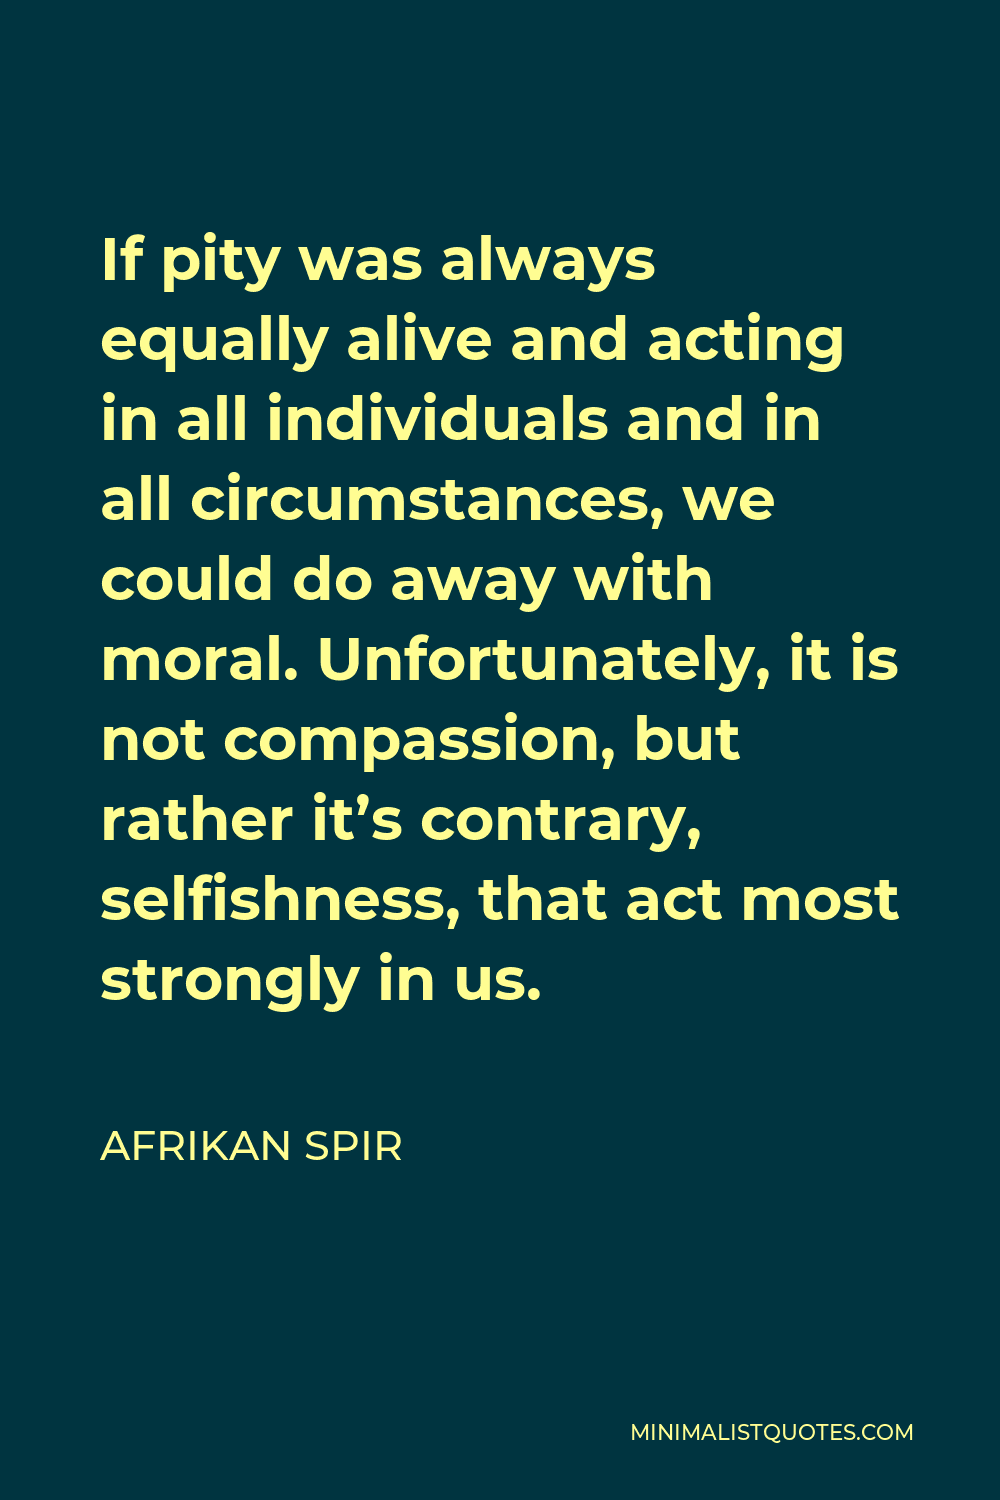 Afrikan Spir Quote - If pity was always equally alive and acting in all individuals and in all circumstances, we could do away with moral. Unfortunately, it is not compassion, but rather it’s contrary, selfishness, that act most strongly in us.